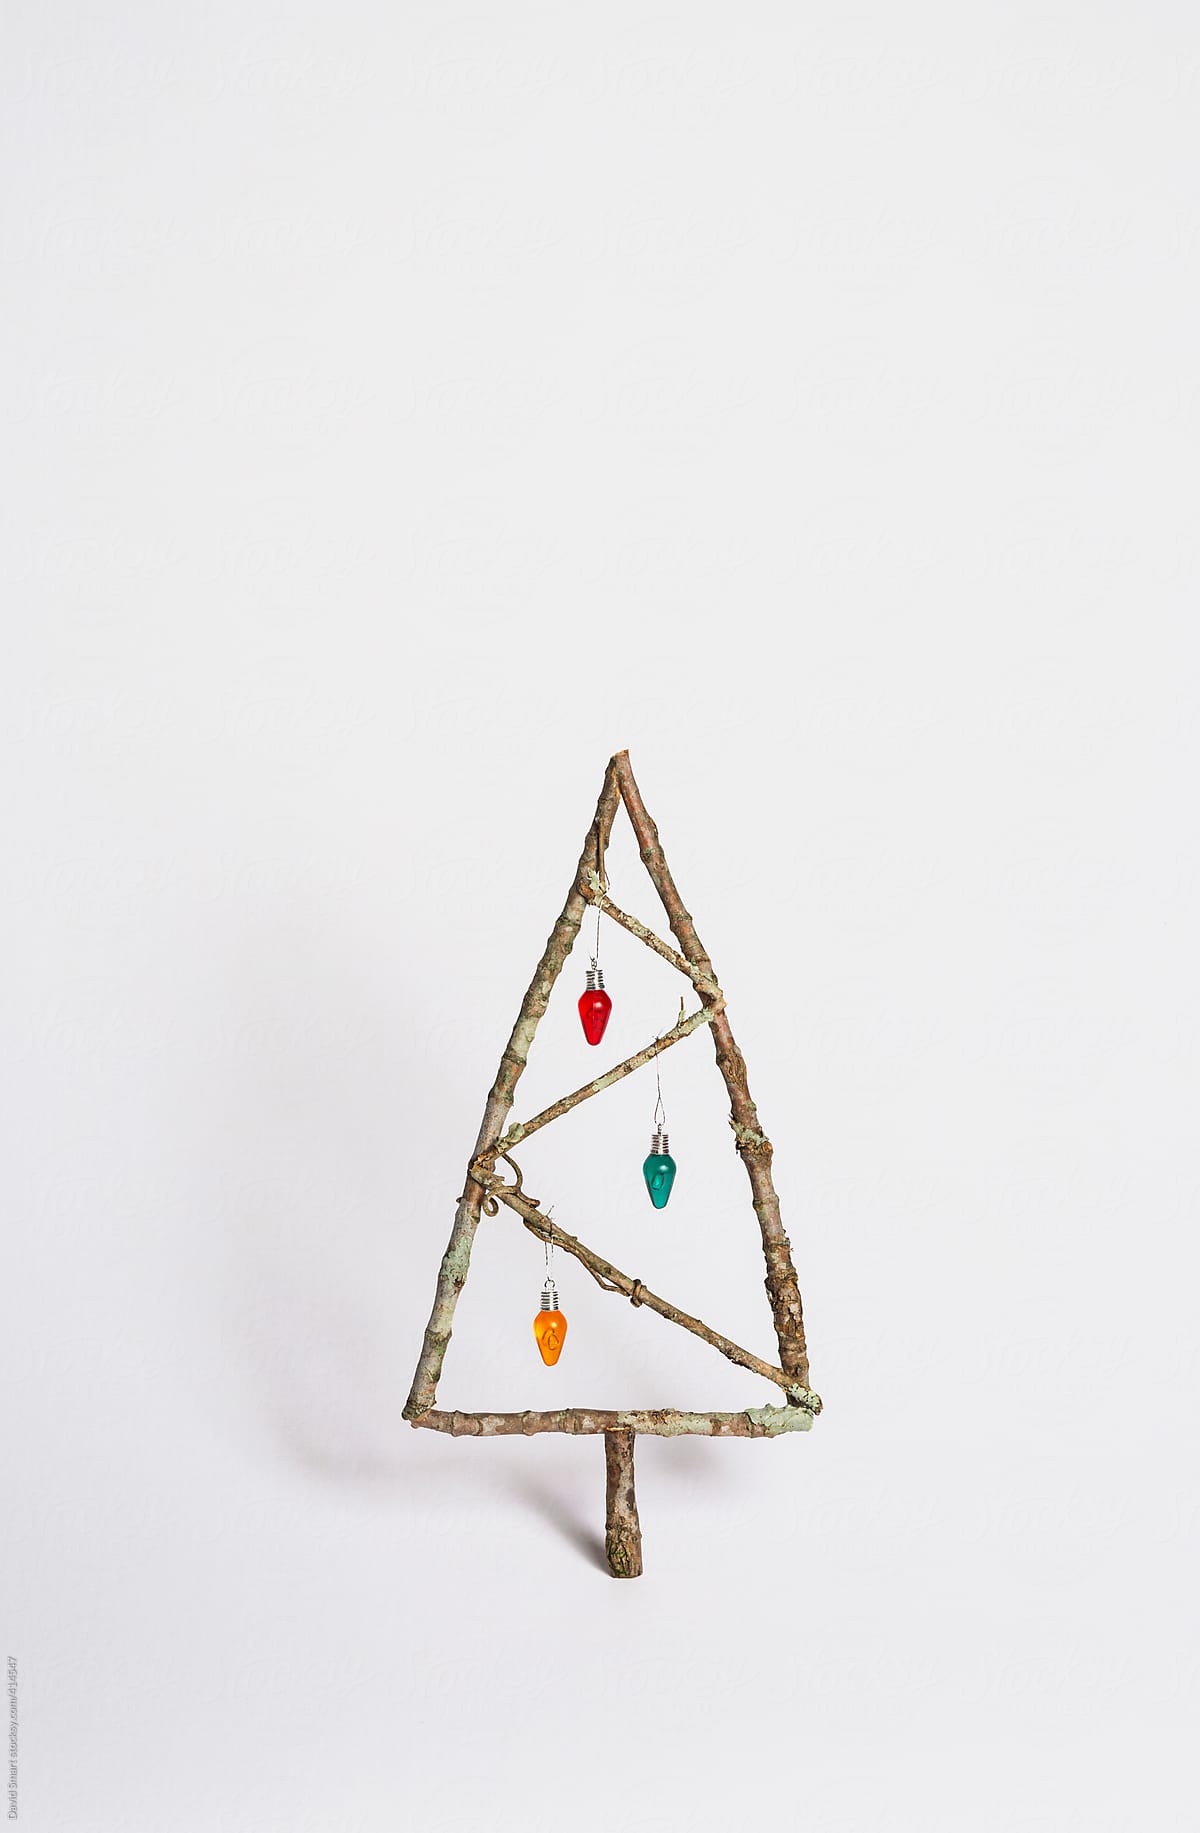 Do It Yourself Christmas Tree Made Of Twigs On White by David Smart